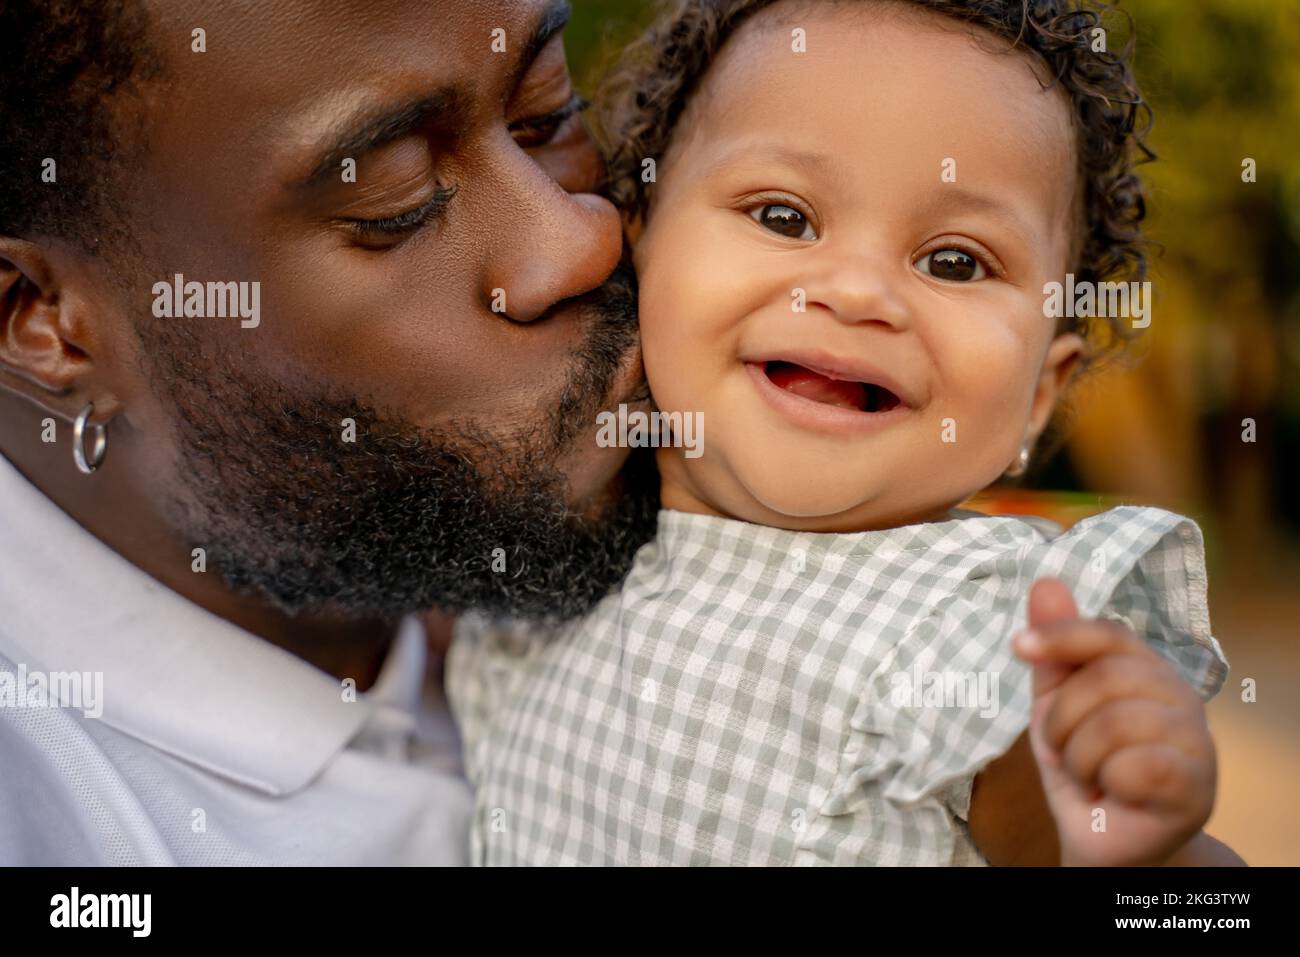 Loving dad giving a kiss to his petty child Stock Photo